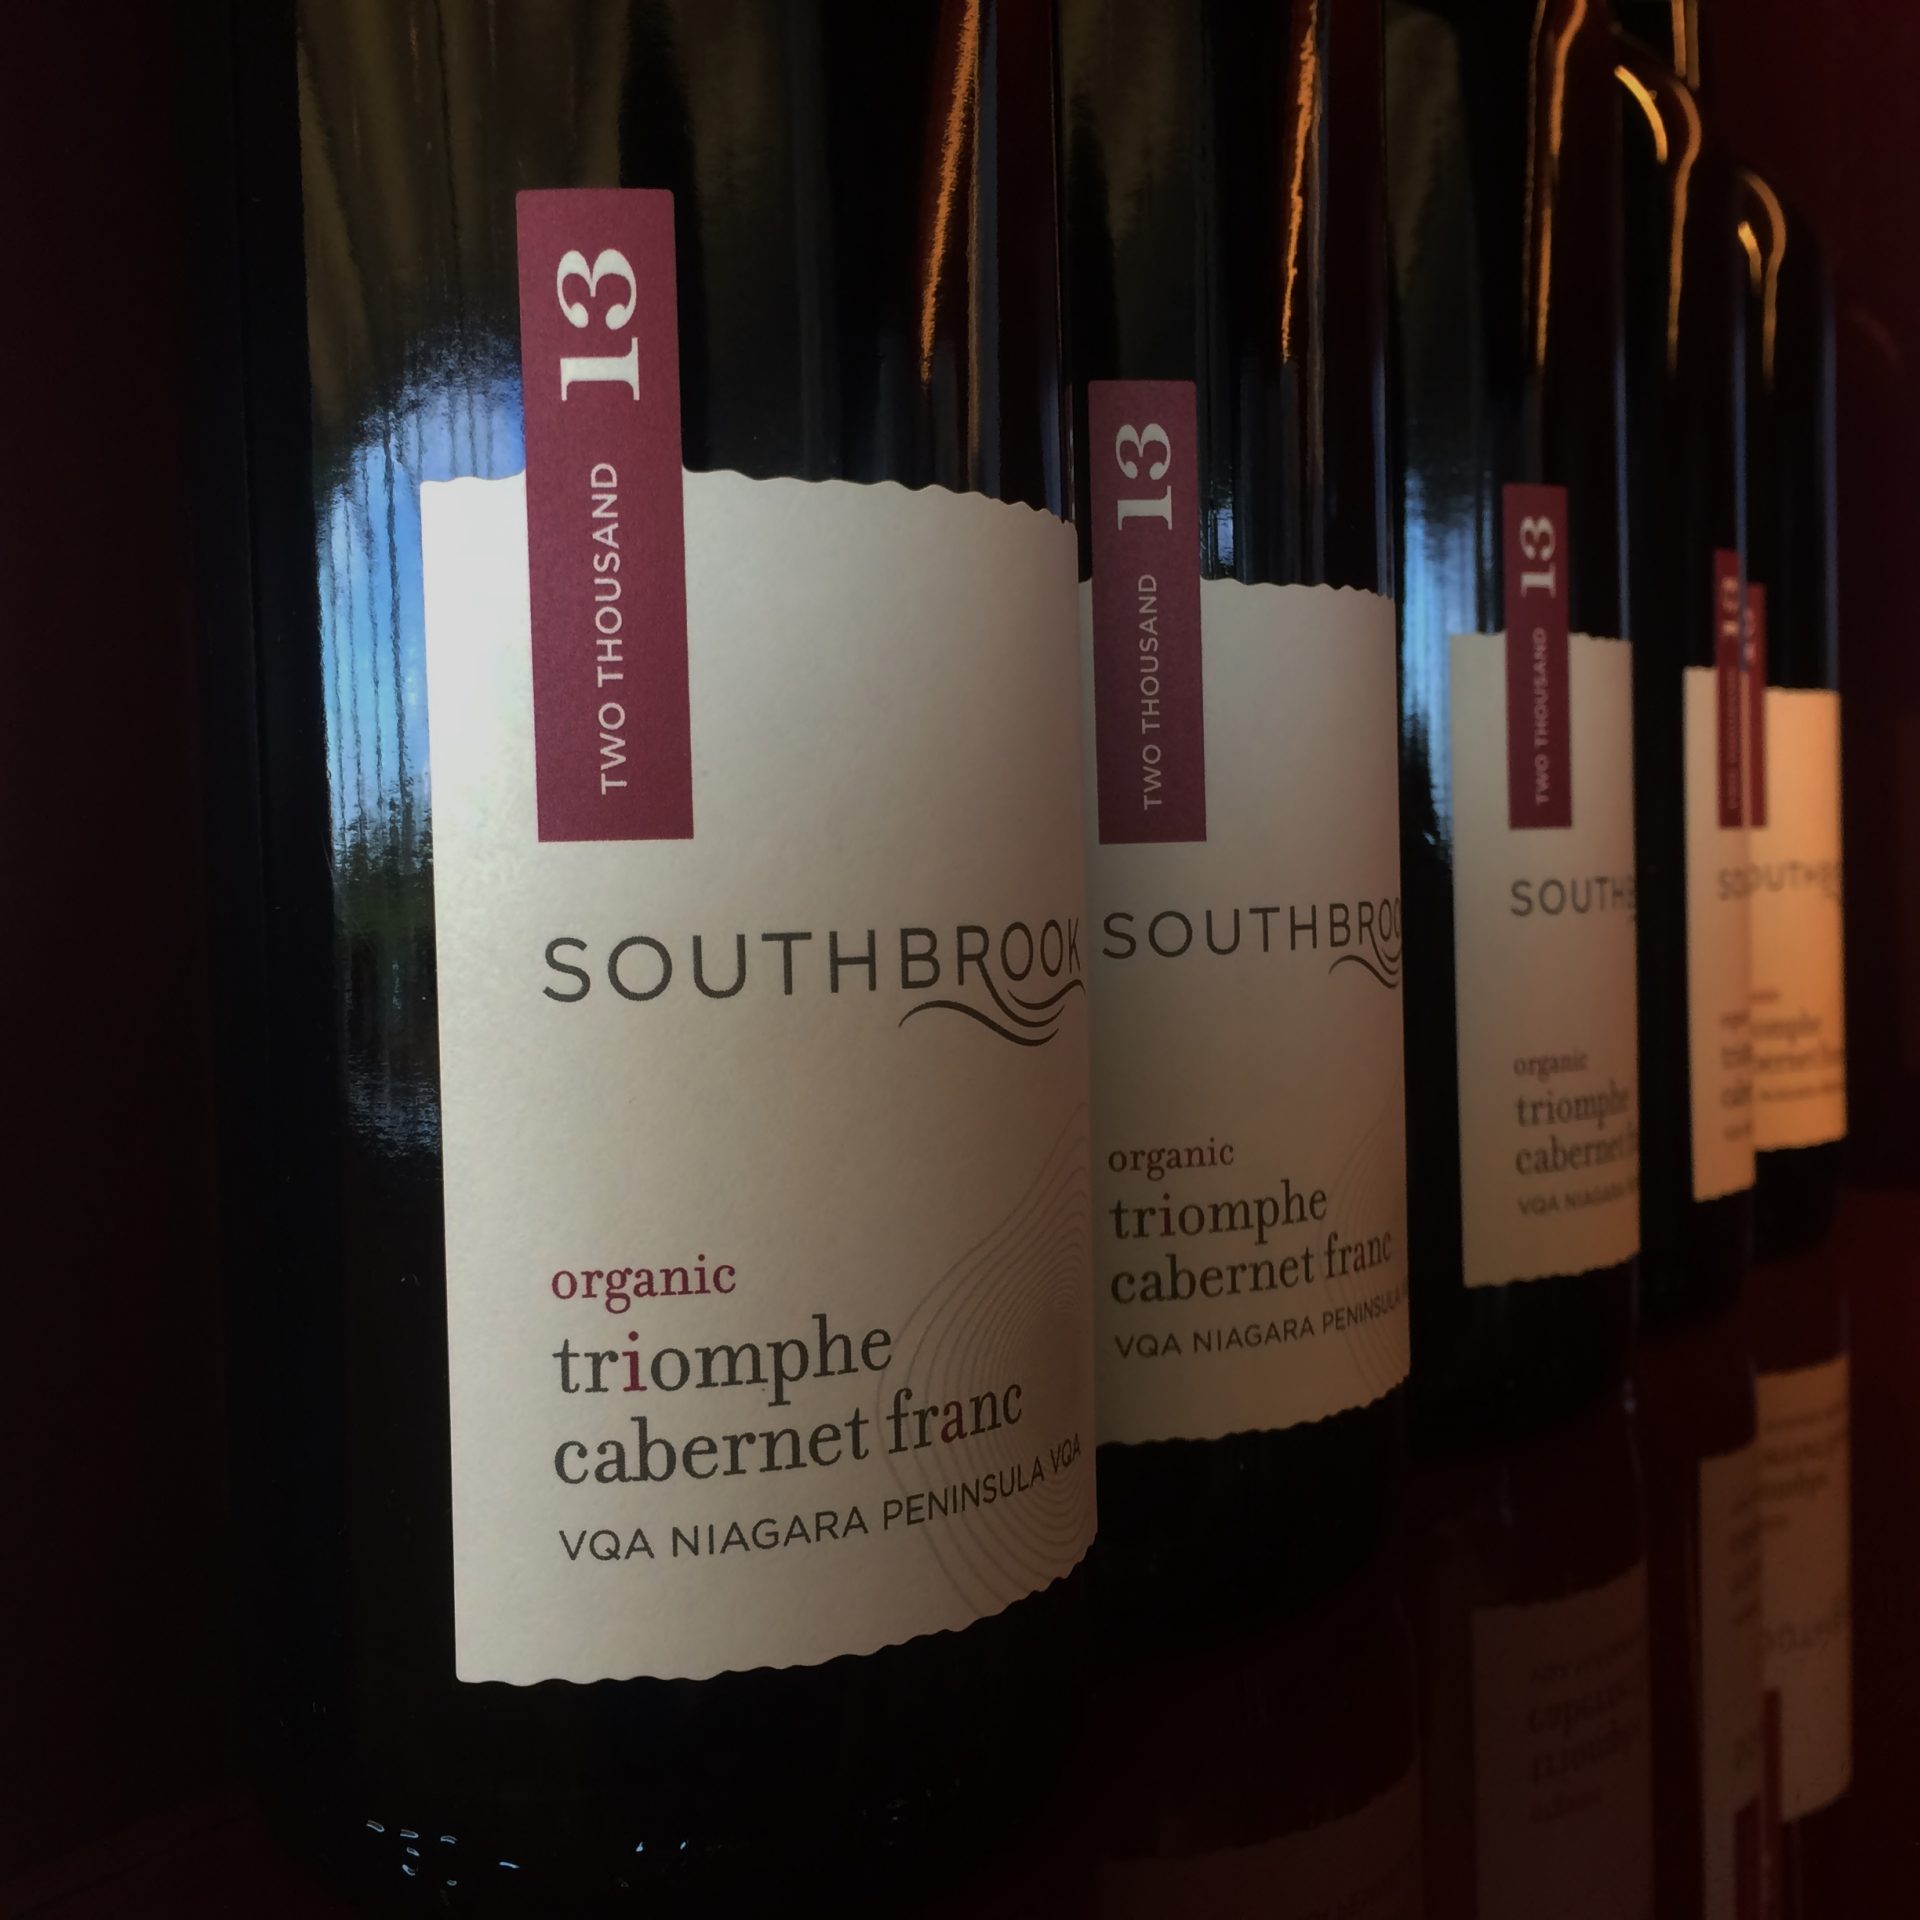 Southbrook Vineyards’ 2013 Triomphe Cabernet Franc Returns To The LCBO